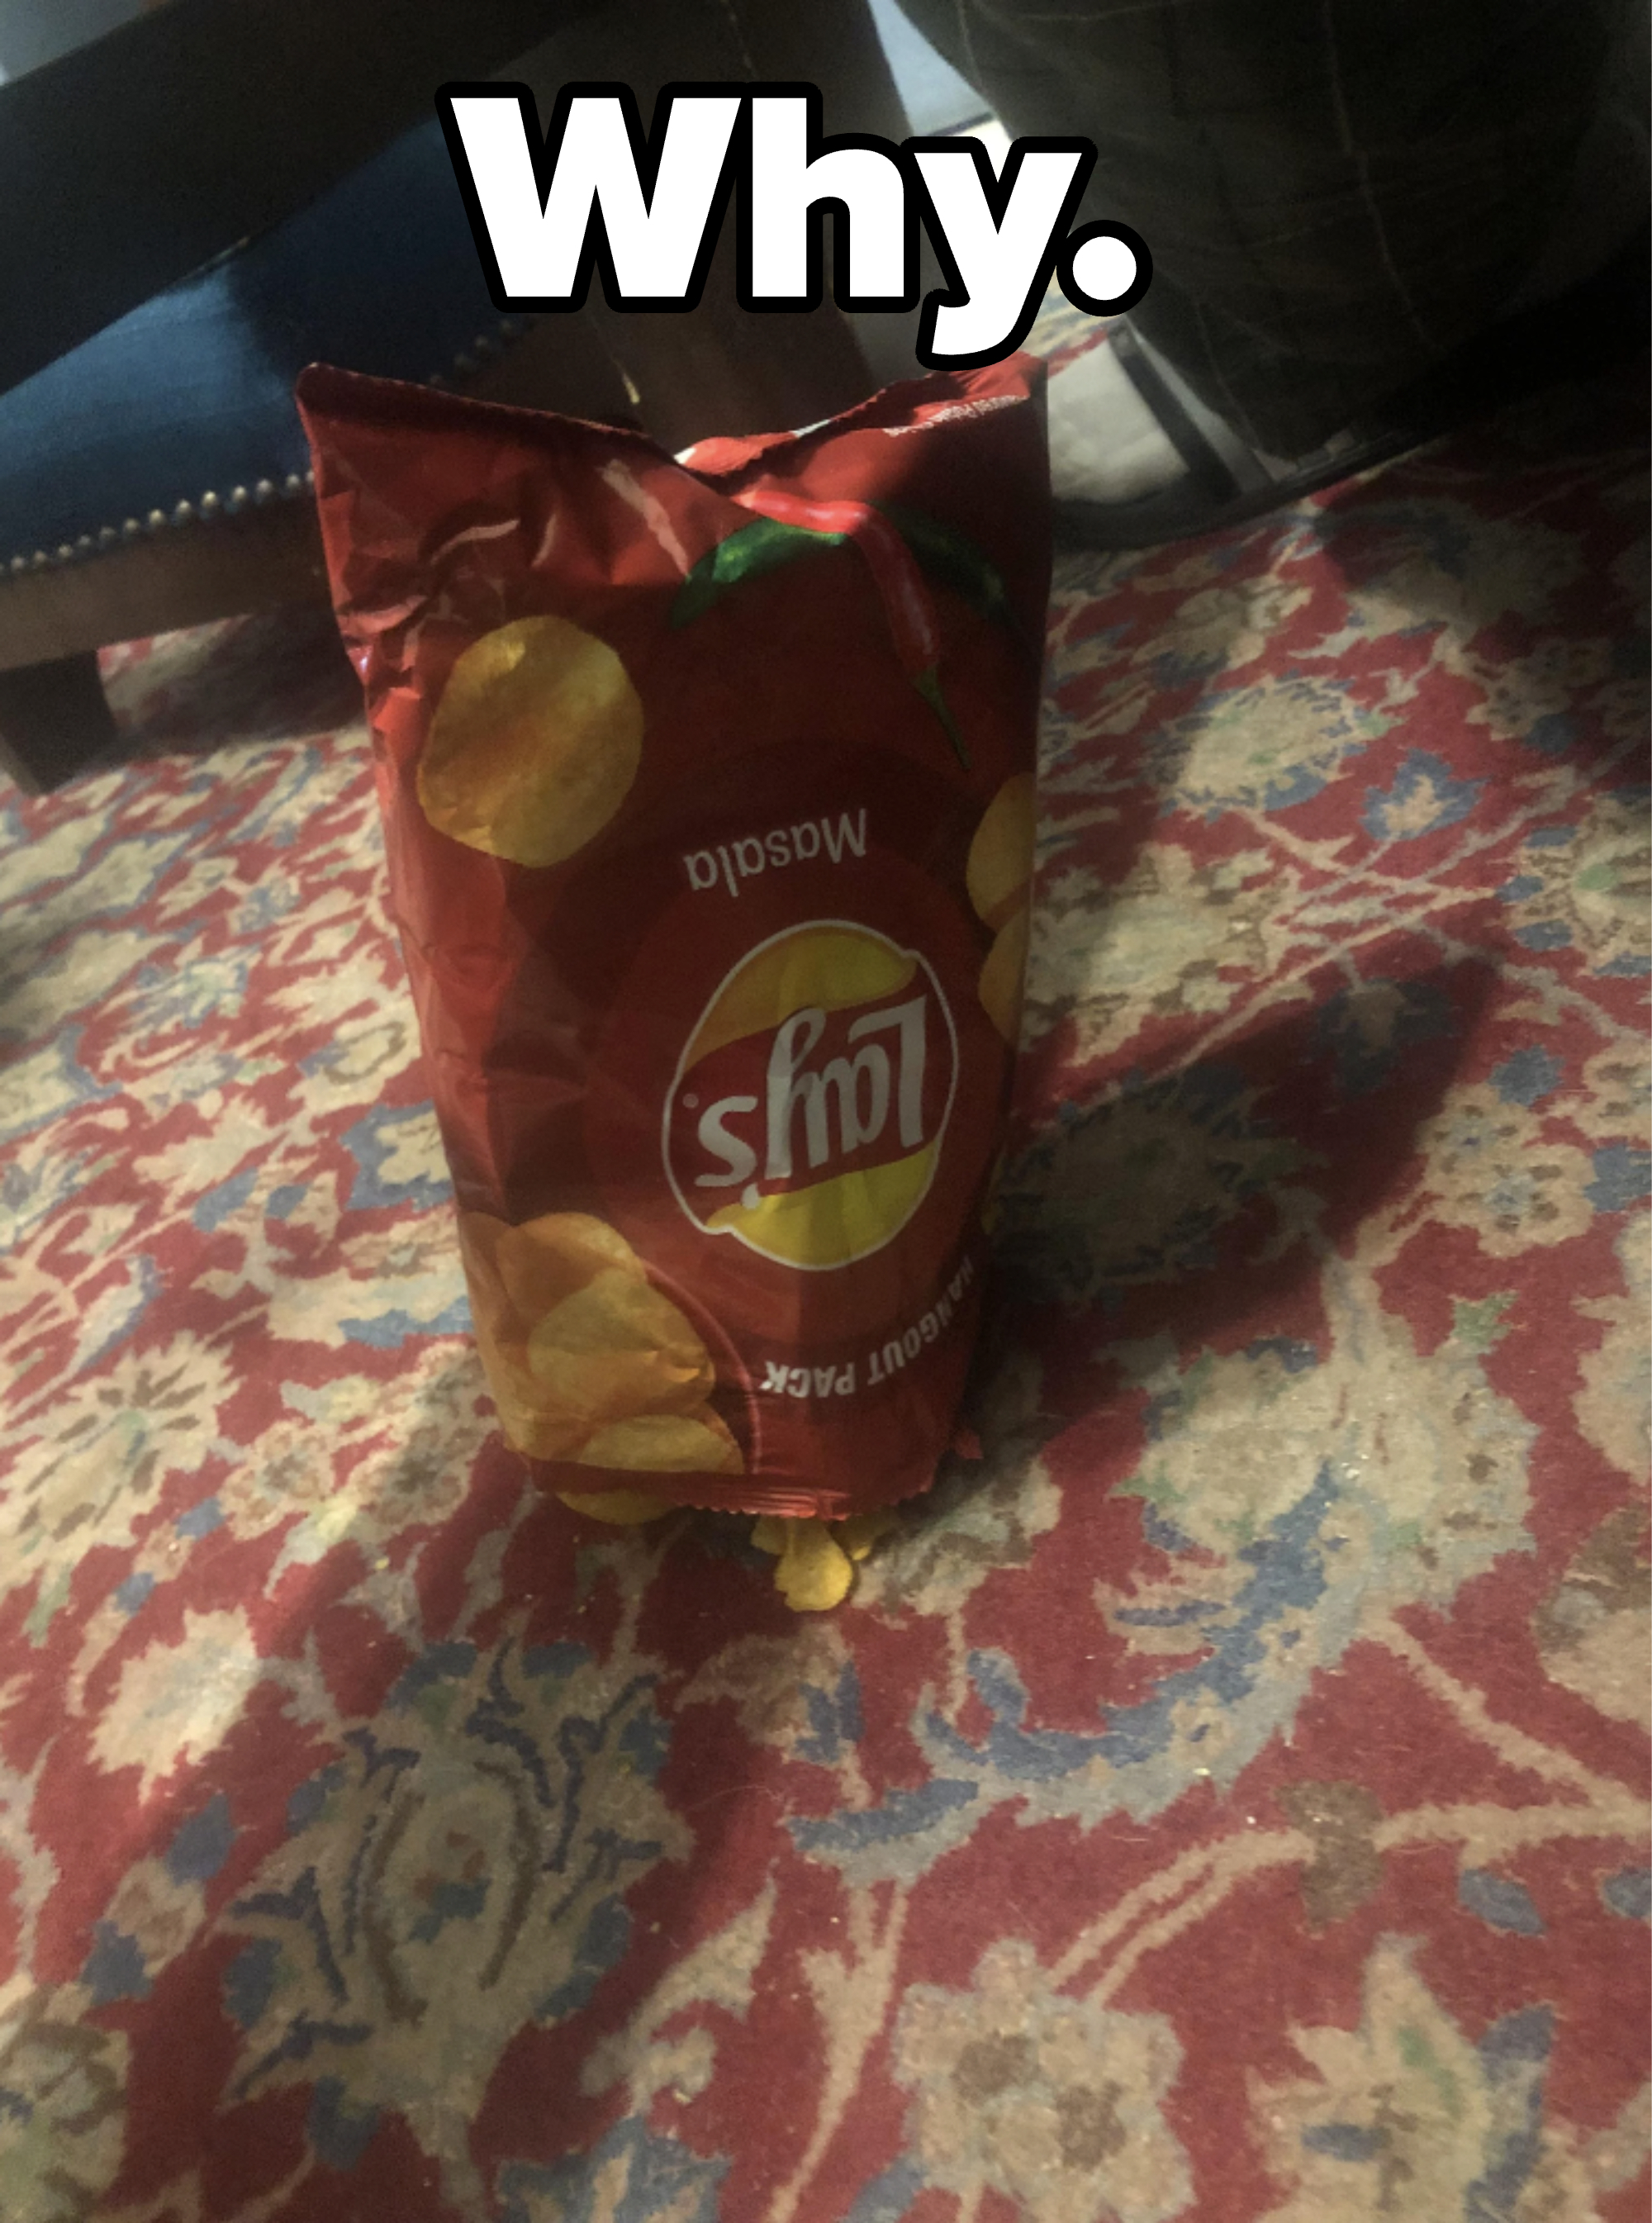 An upside-down open bag of chips on a patterned carpet with a few chips visible at the bottom and caption, &quot;Why&quot;